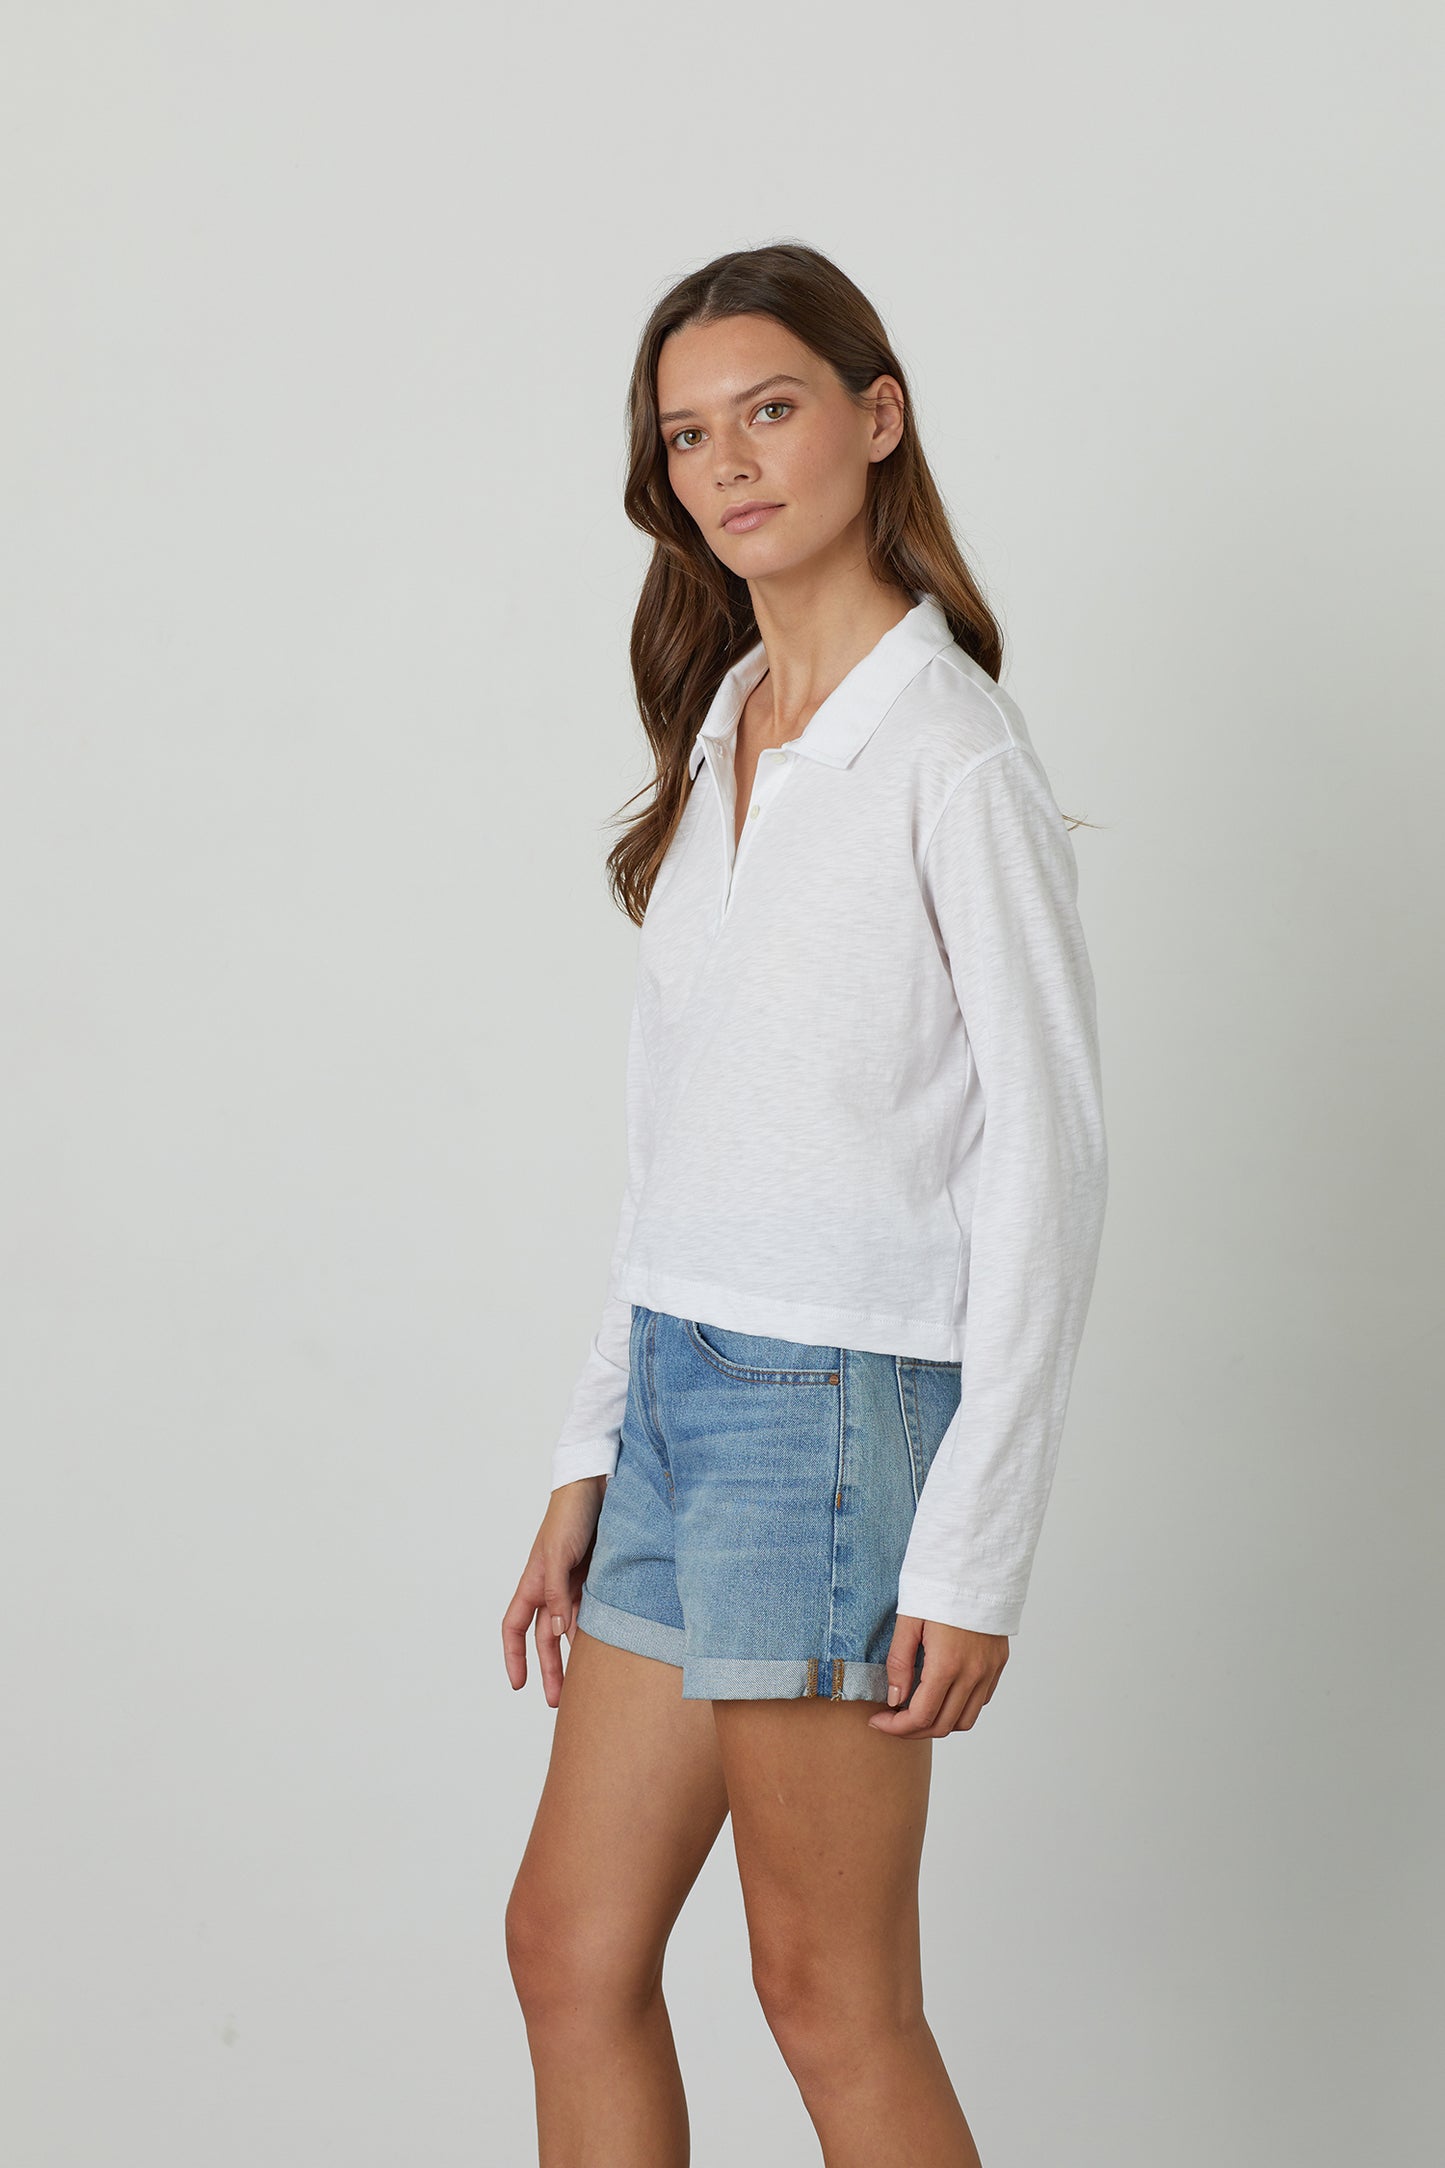 Marion Cotton Long Sleeve Collar Tee in white